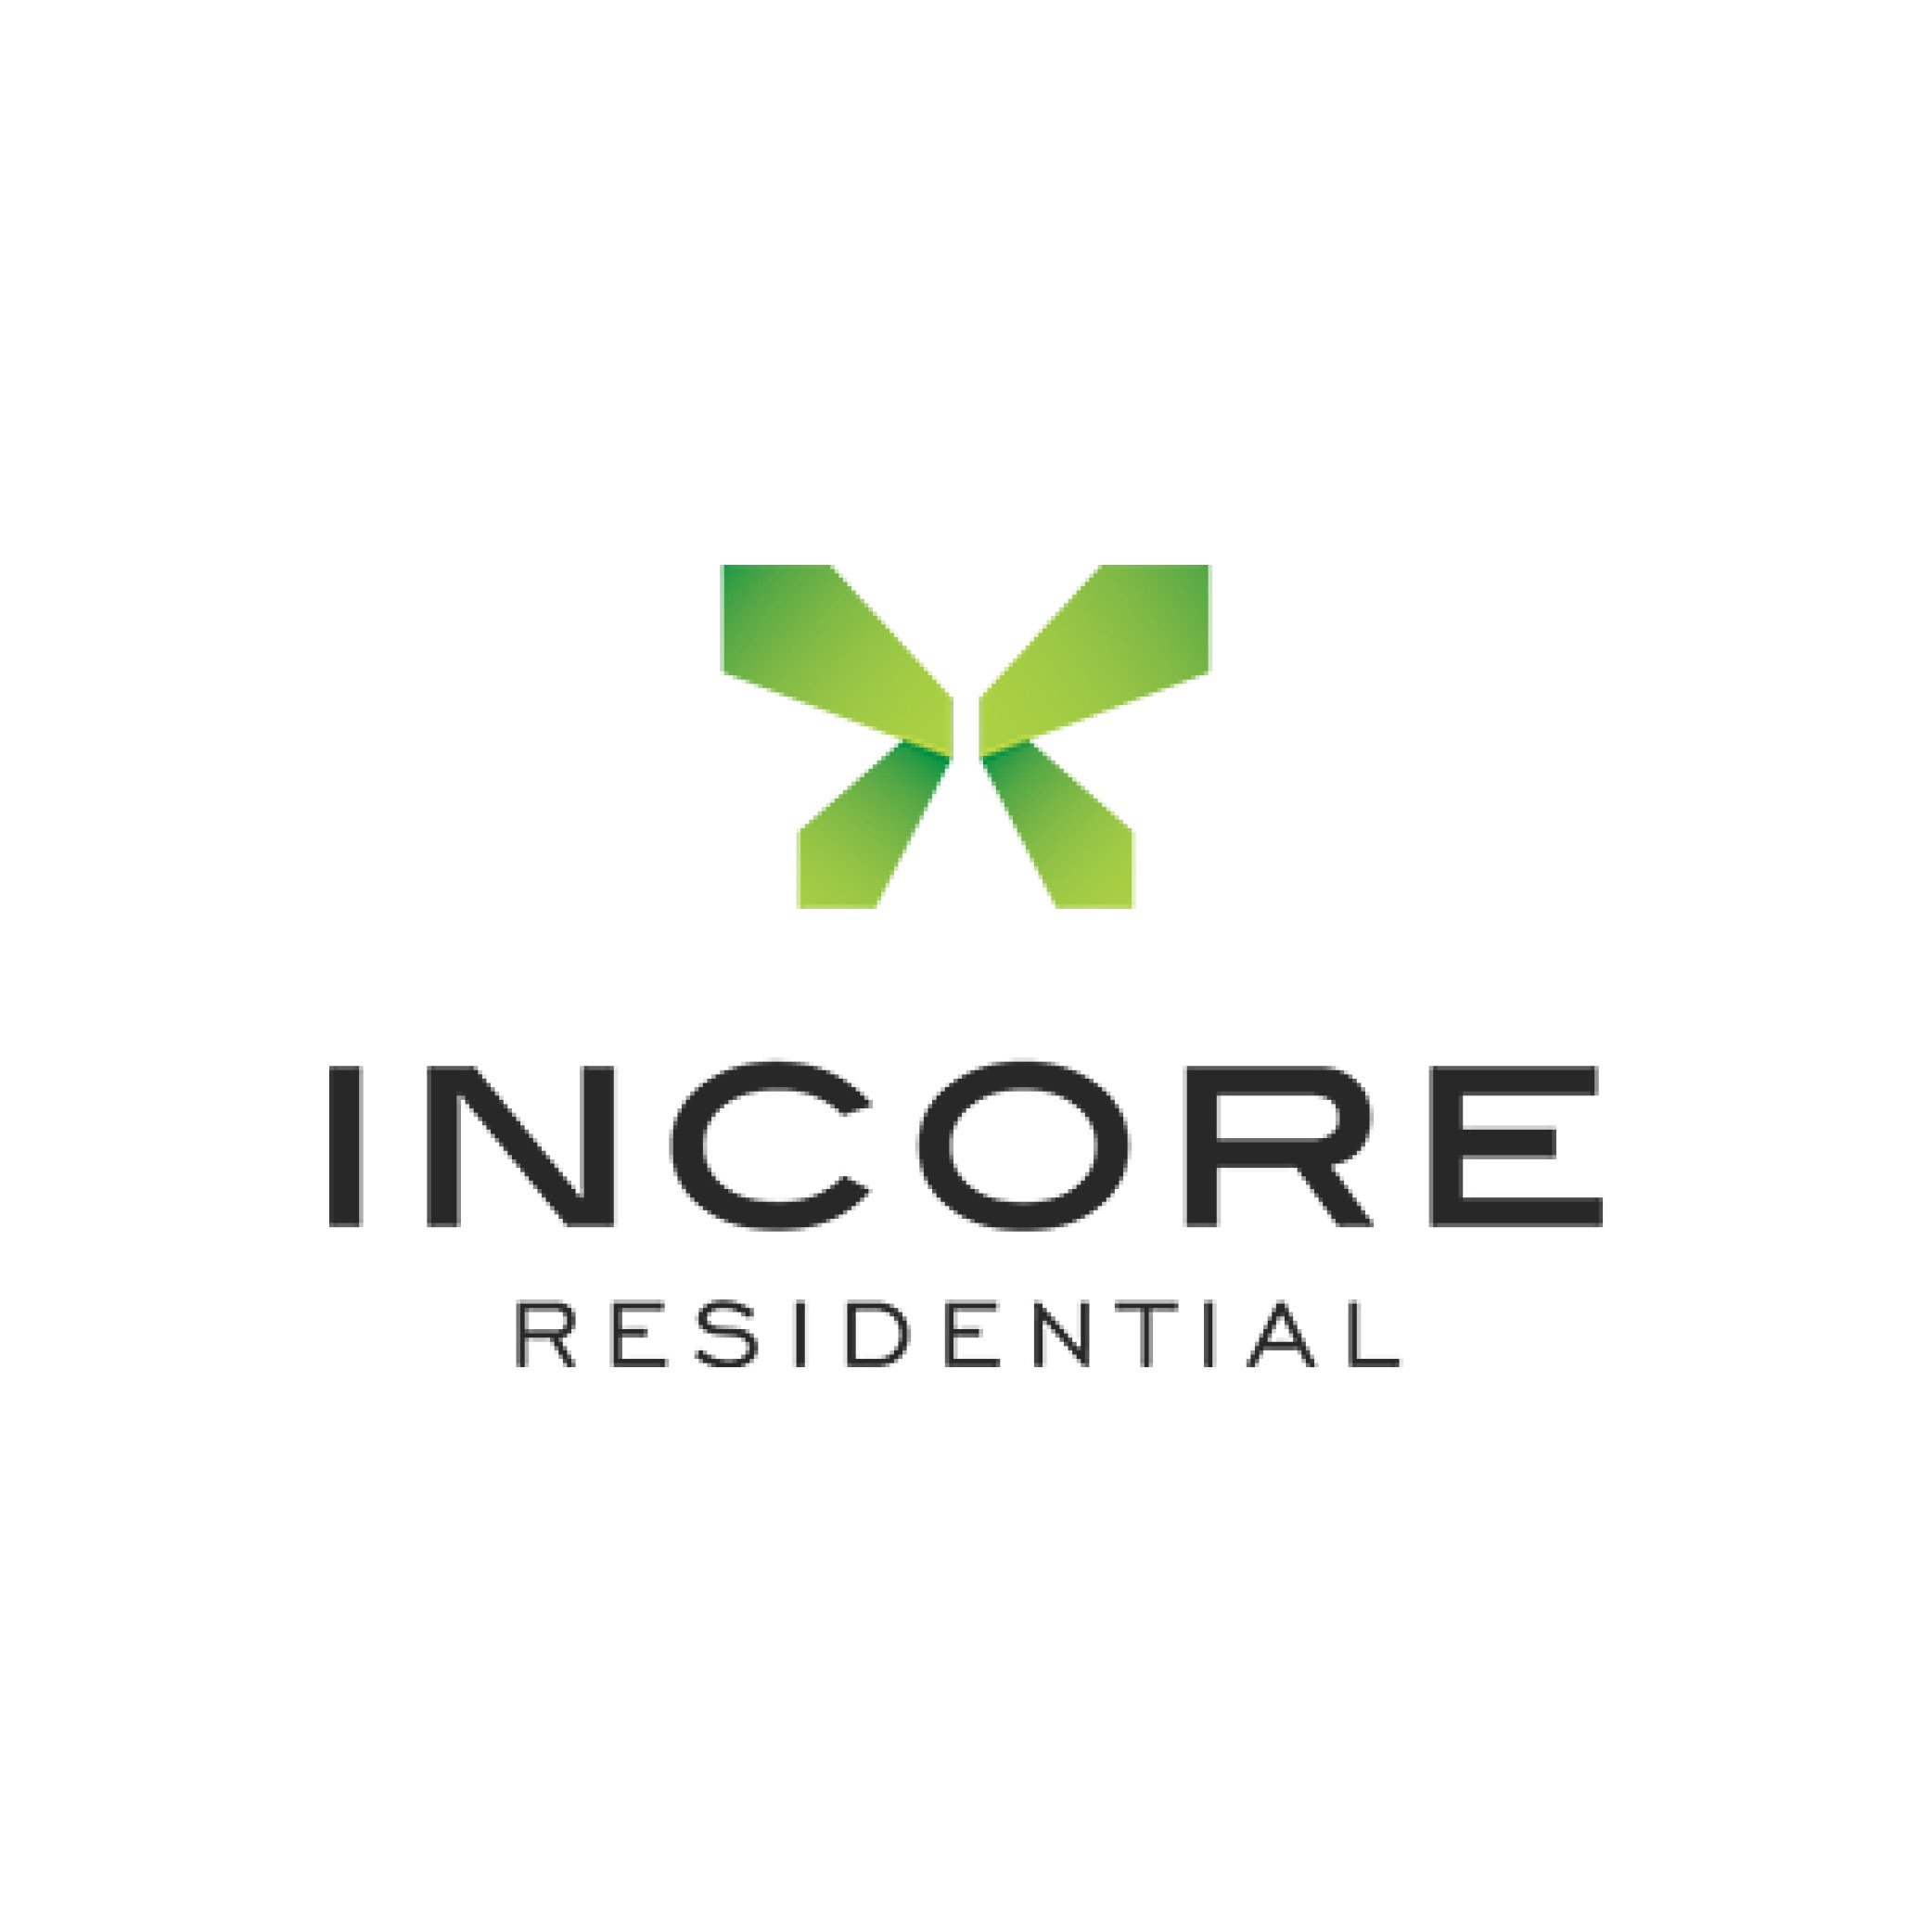 Incore Residential